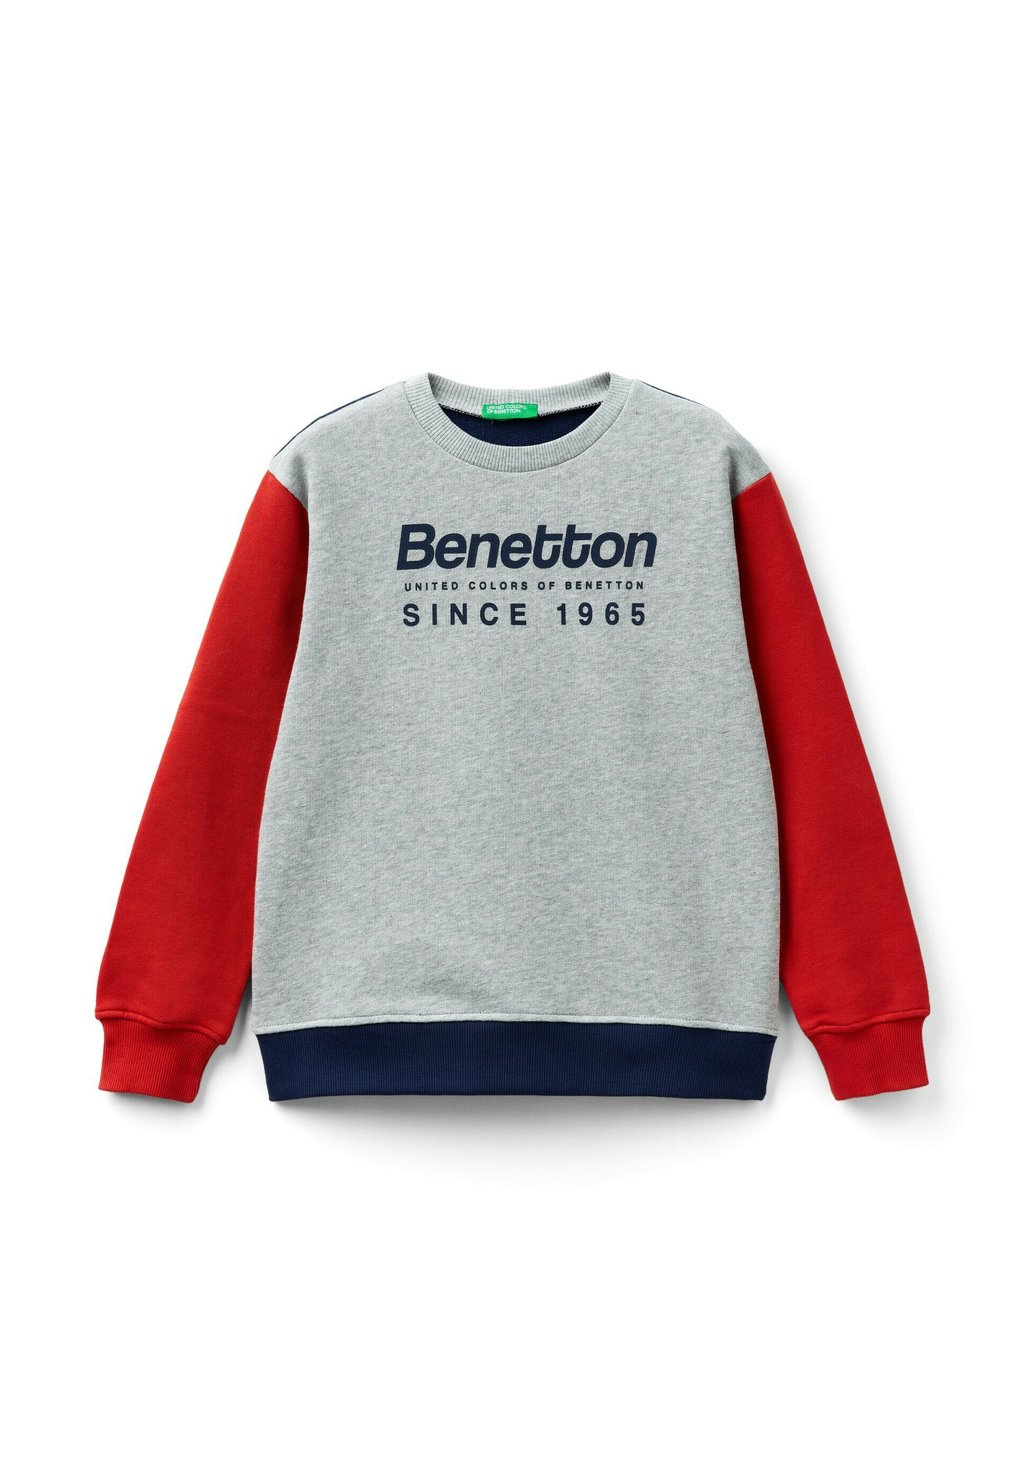 Толстовка WITH LOGO United Colors of Benetton, цвет Molted Grey толстовка with logo united colors of benetton цвет molted grey